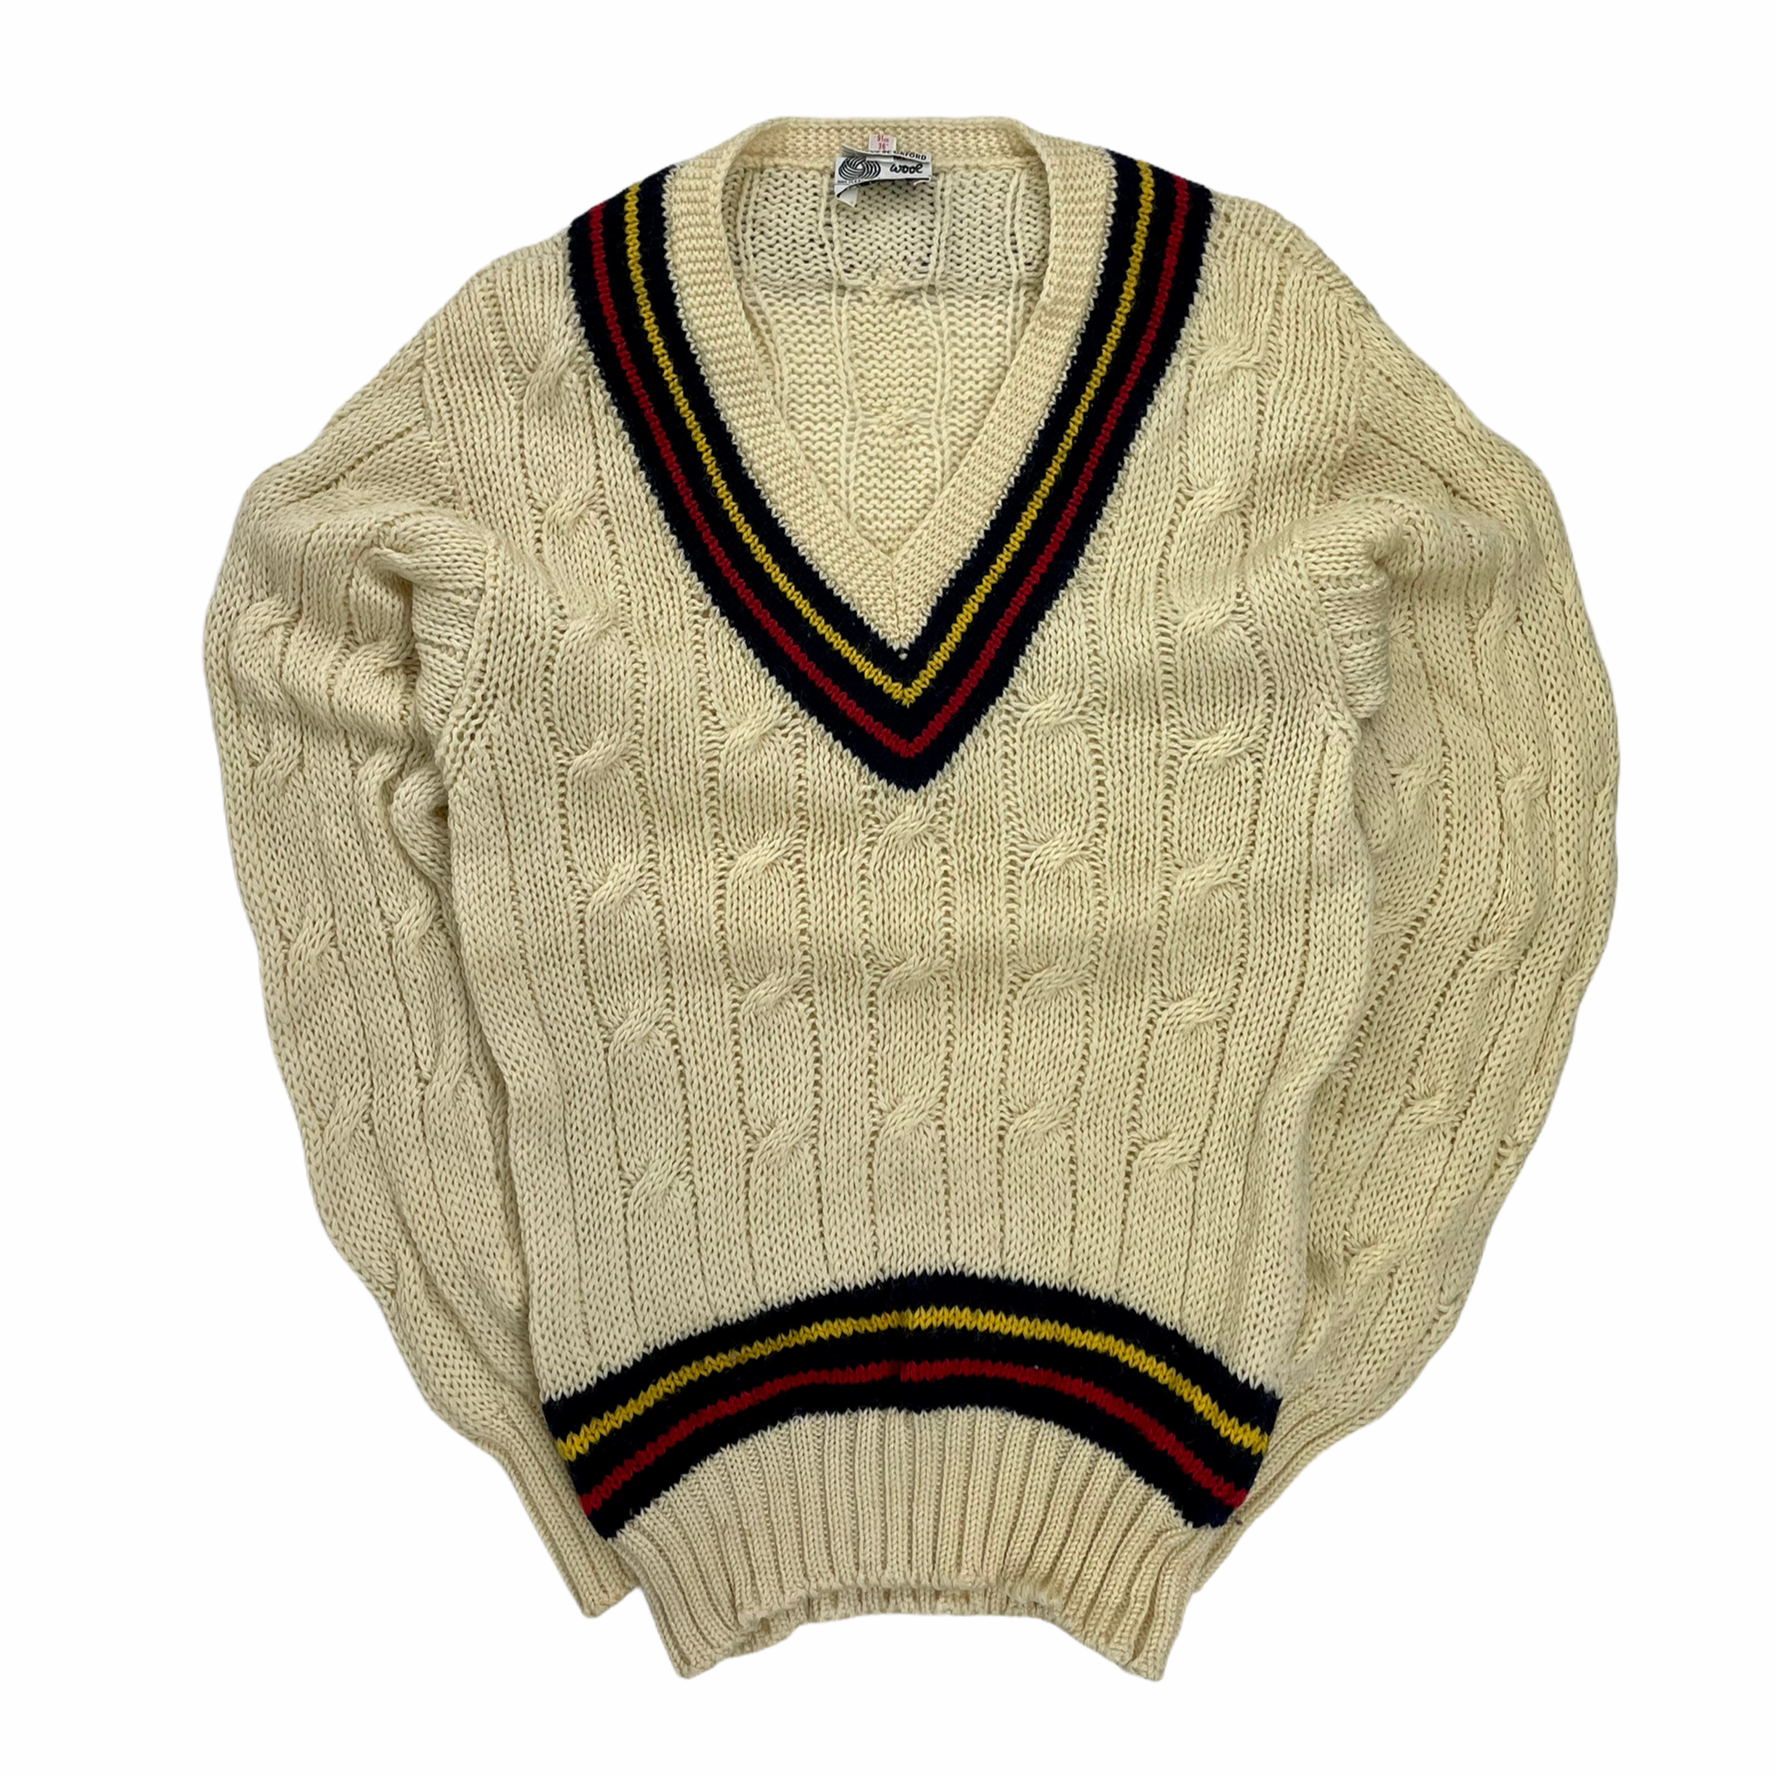 Vintage Cable Knit Cricket Sweater - Restorecph